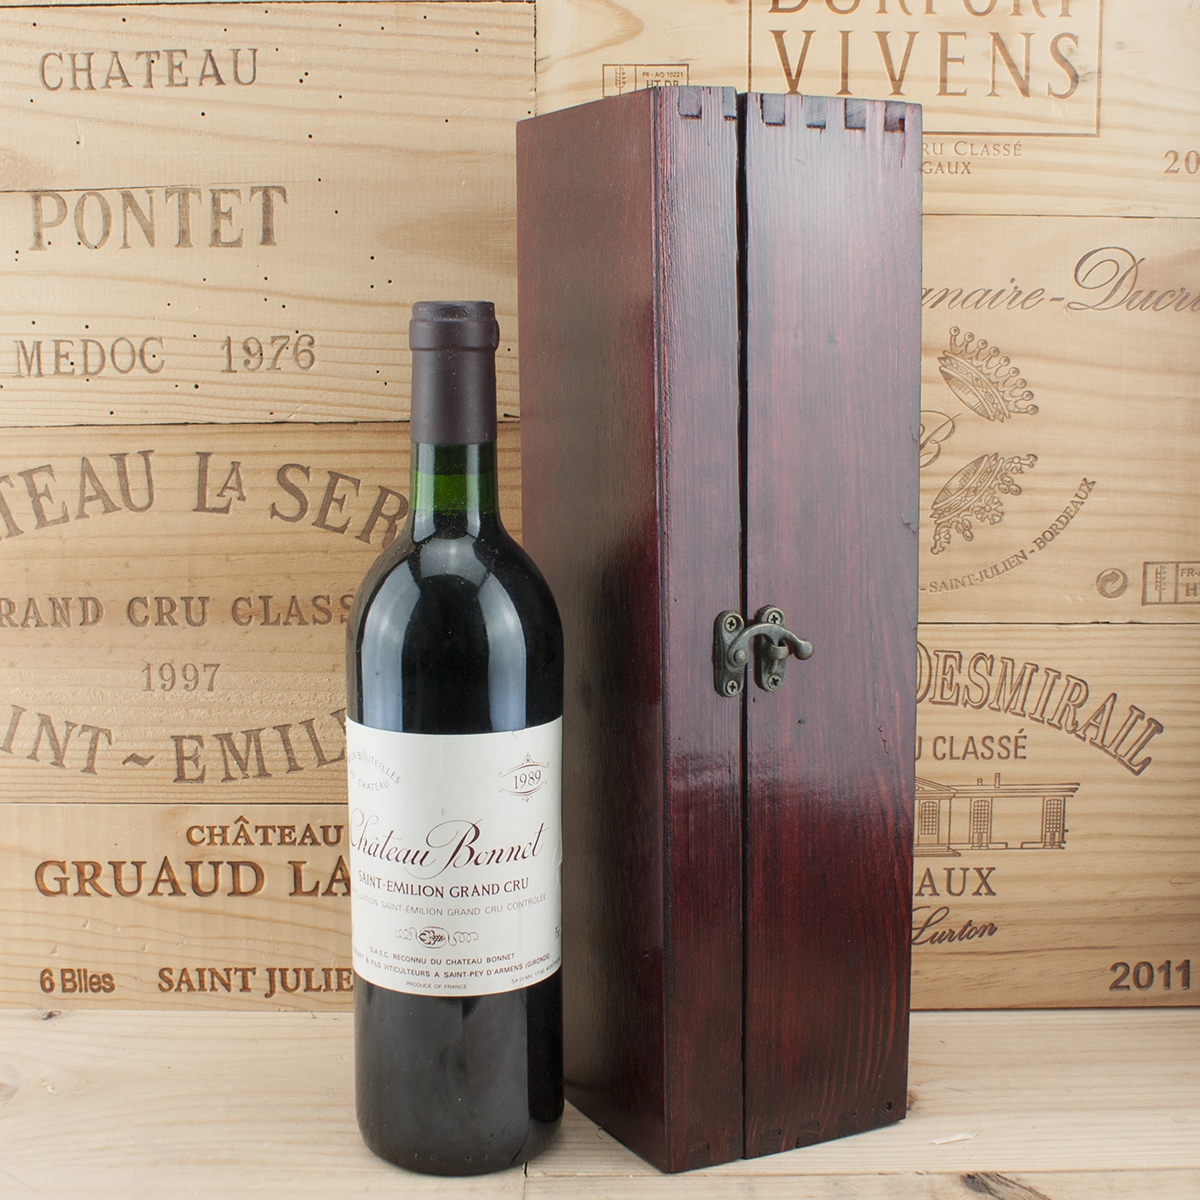 1989 Chateau Bonnet in the red box